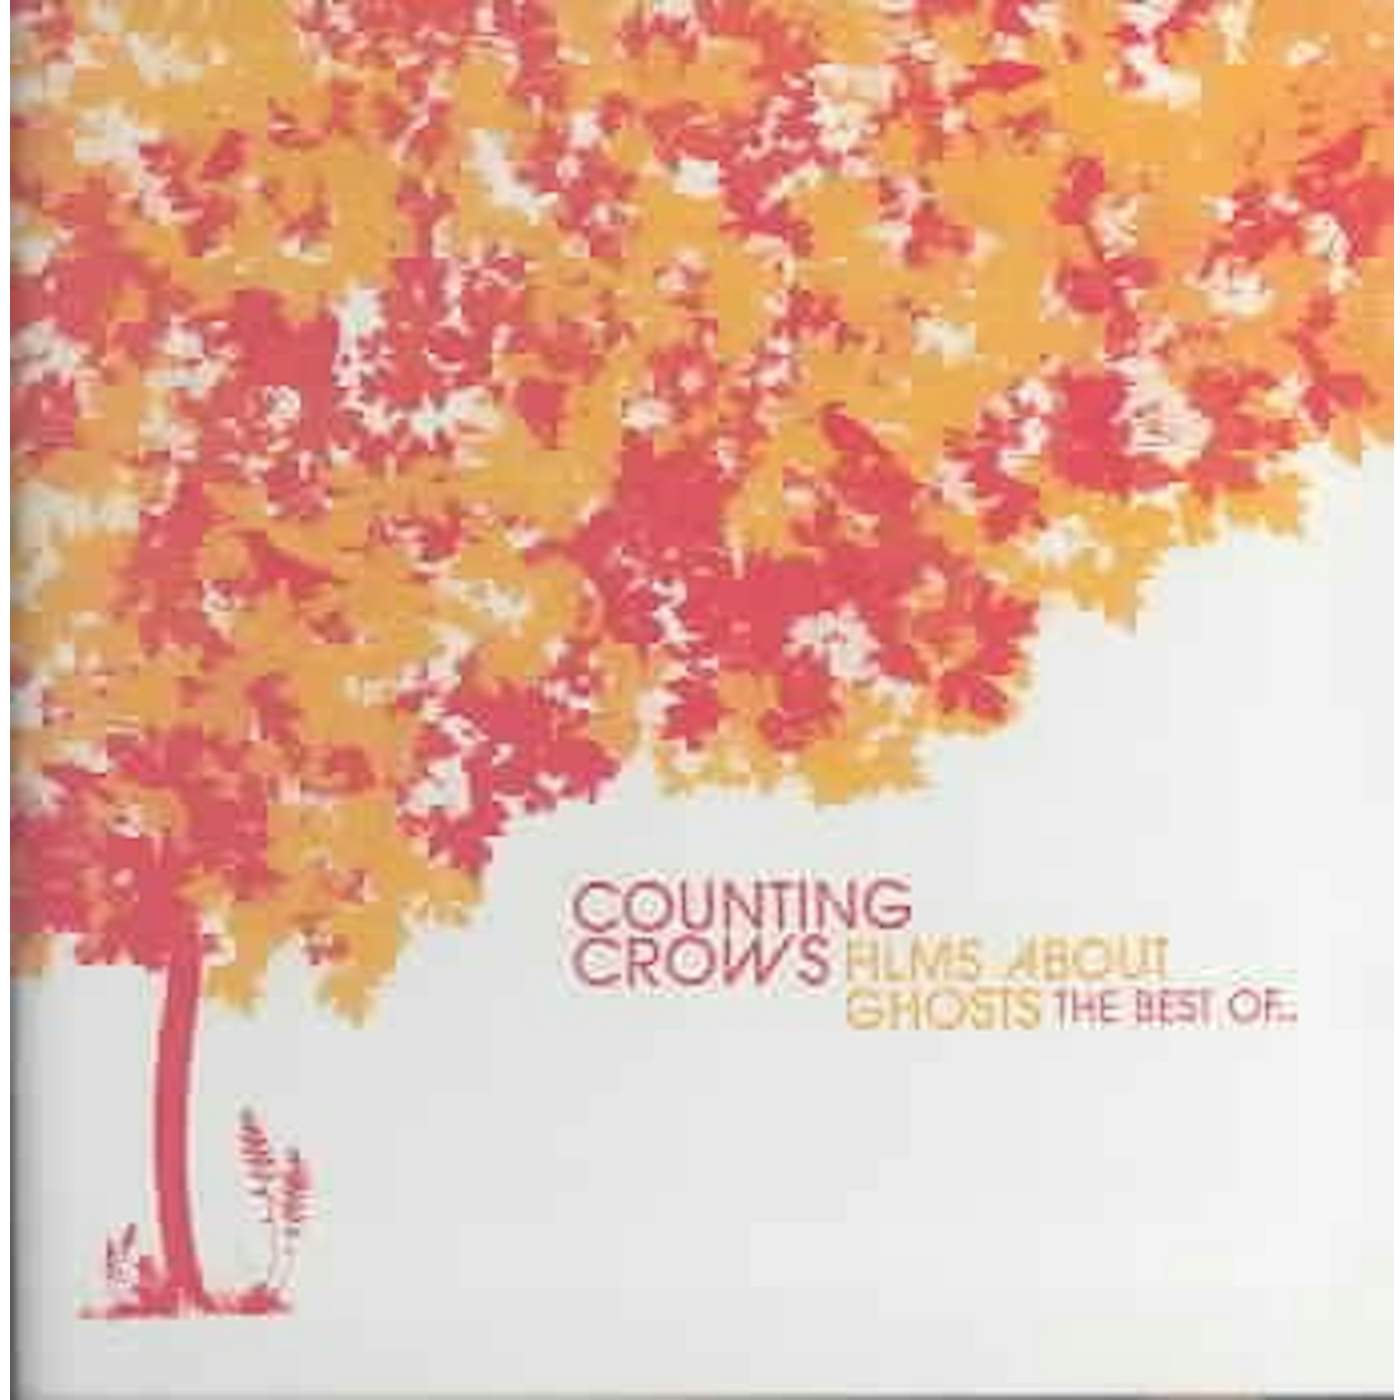 Counting Crows Films About Ghosts: Best Of (w/ New Track Added) CD